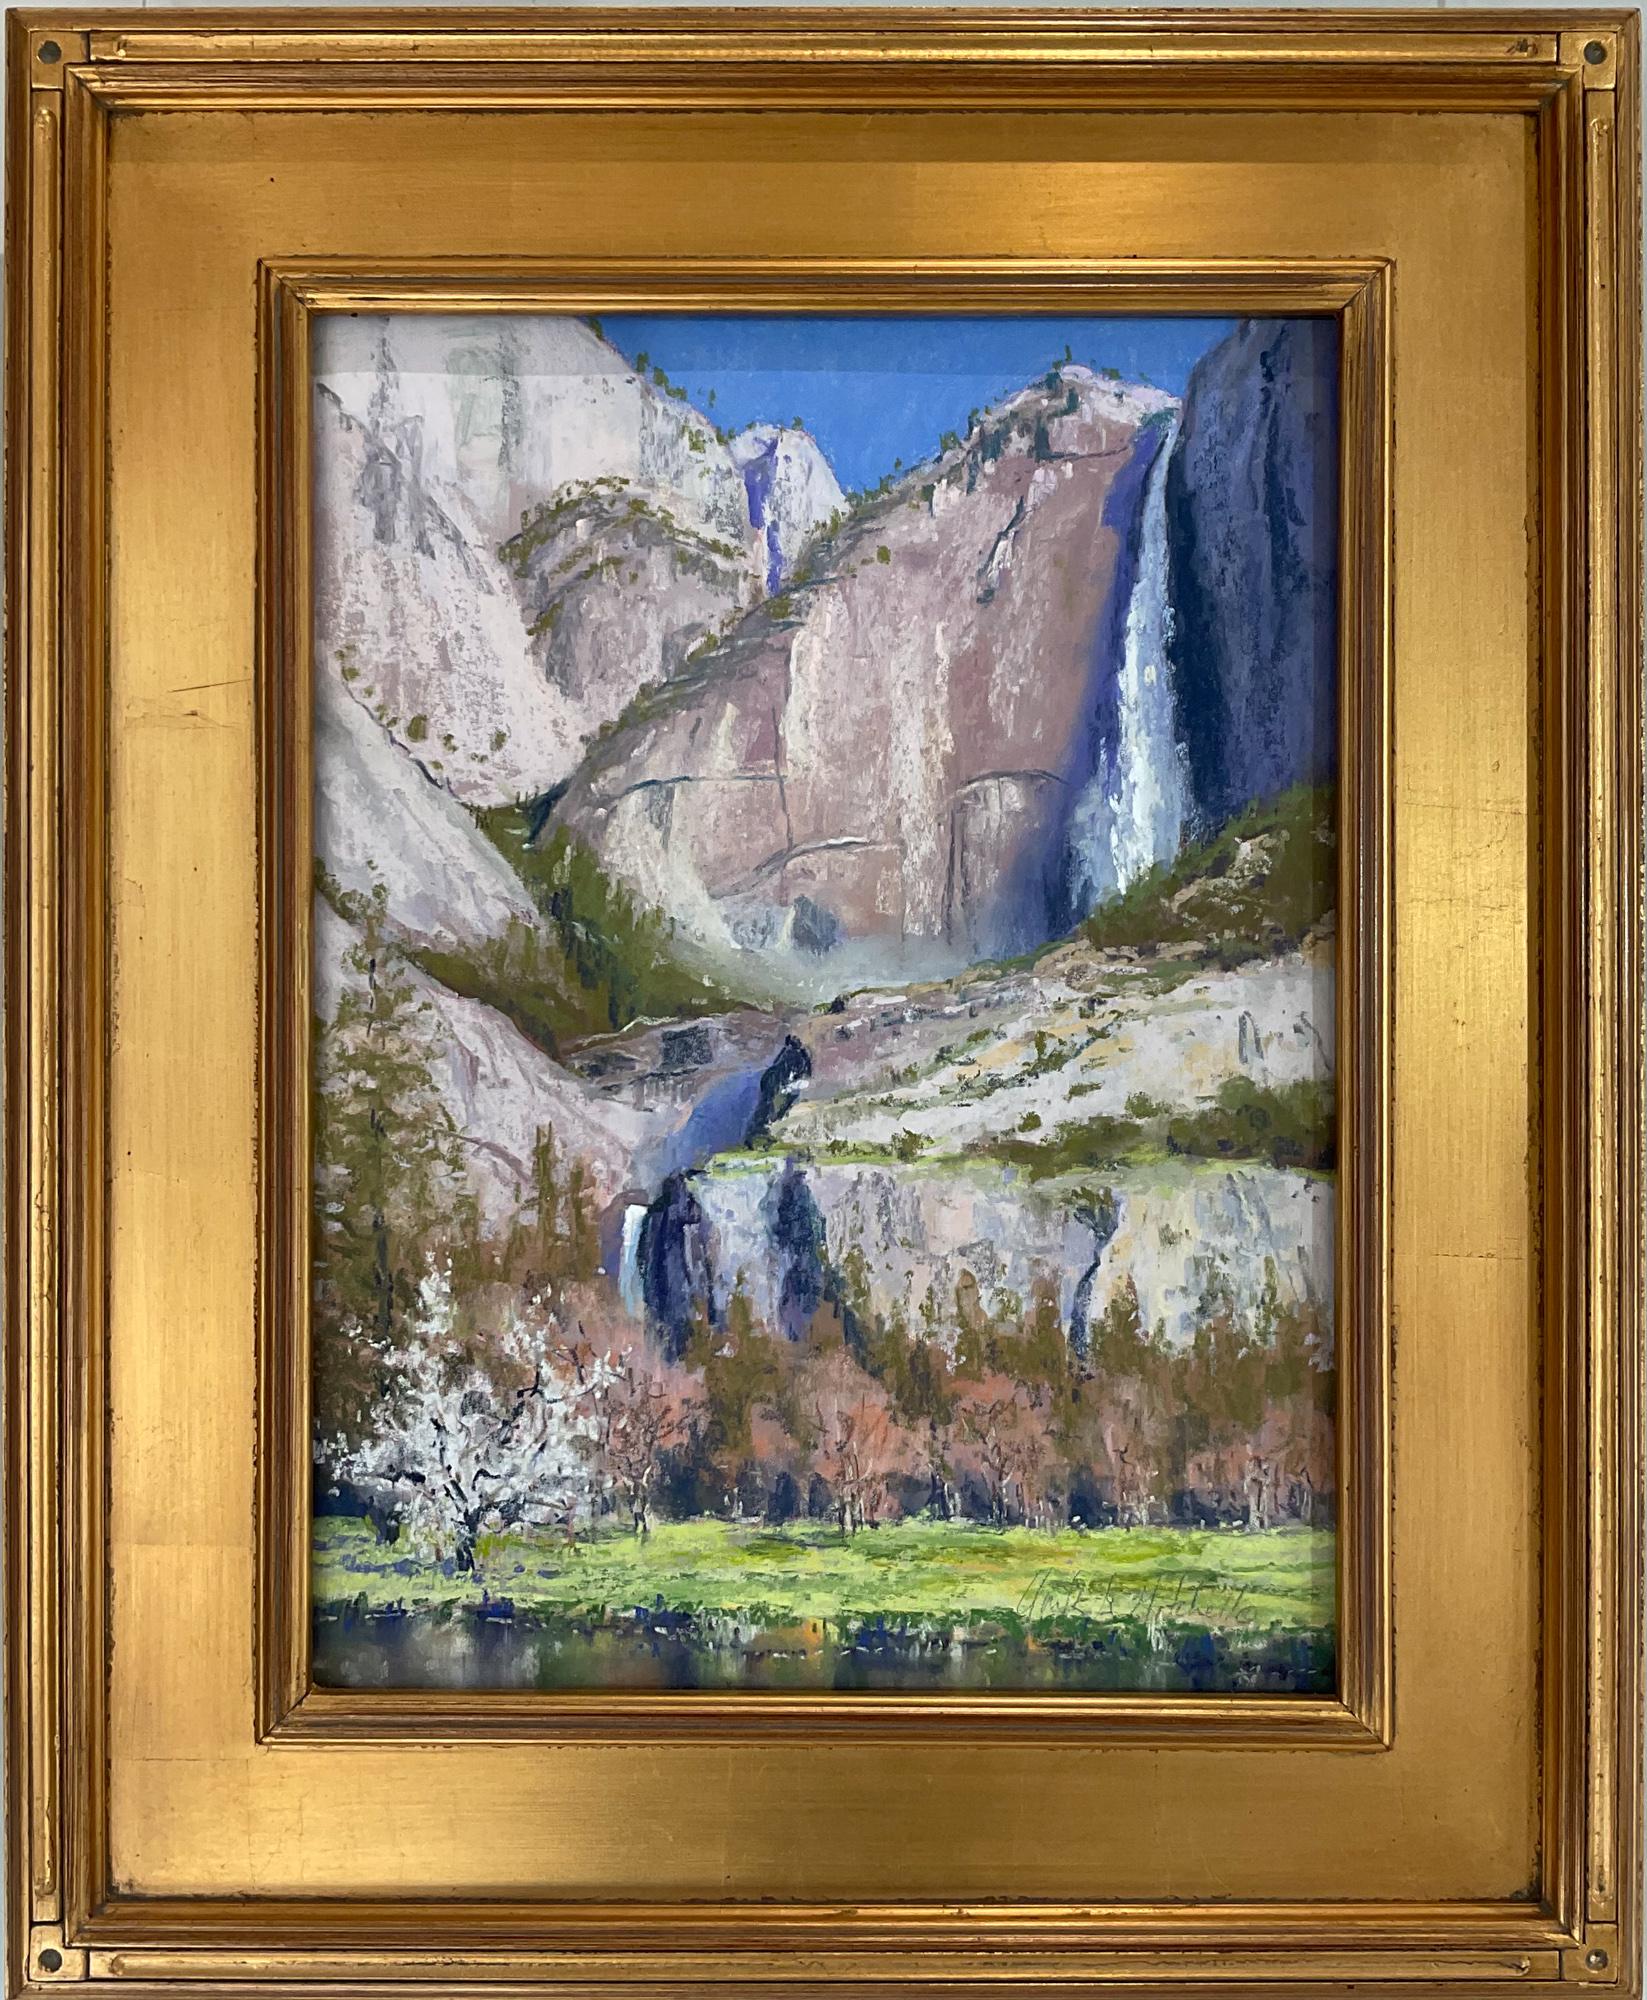 Clark Mitchell Landscape Painting - "Yosemite Springtime" A Bright Pastel Painting of Half Dome Mountain Range in CA